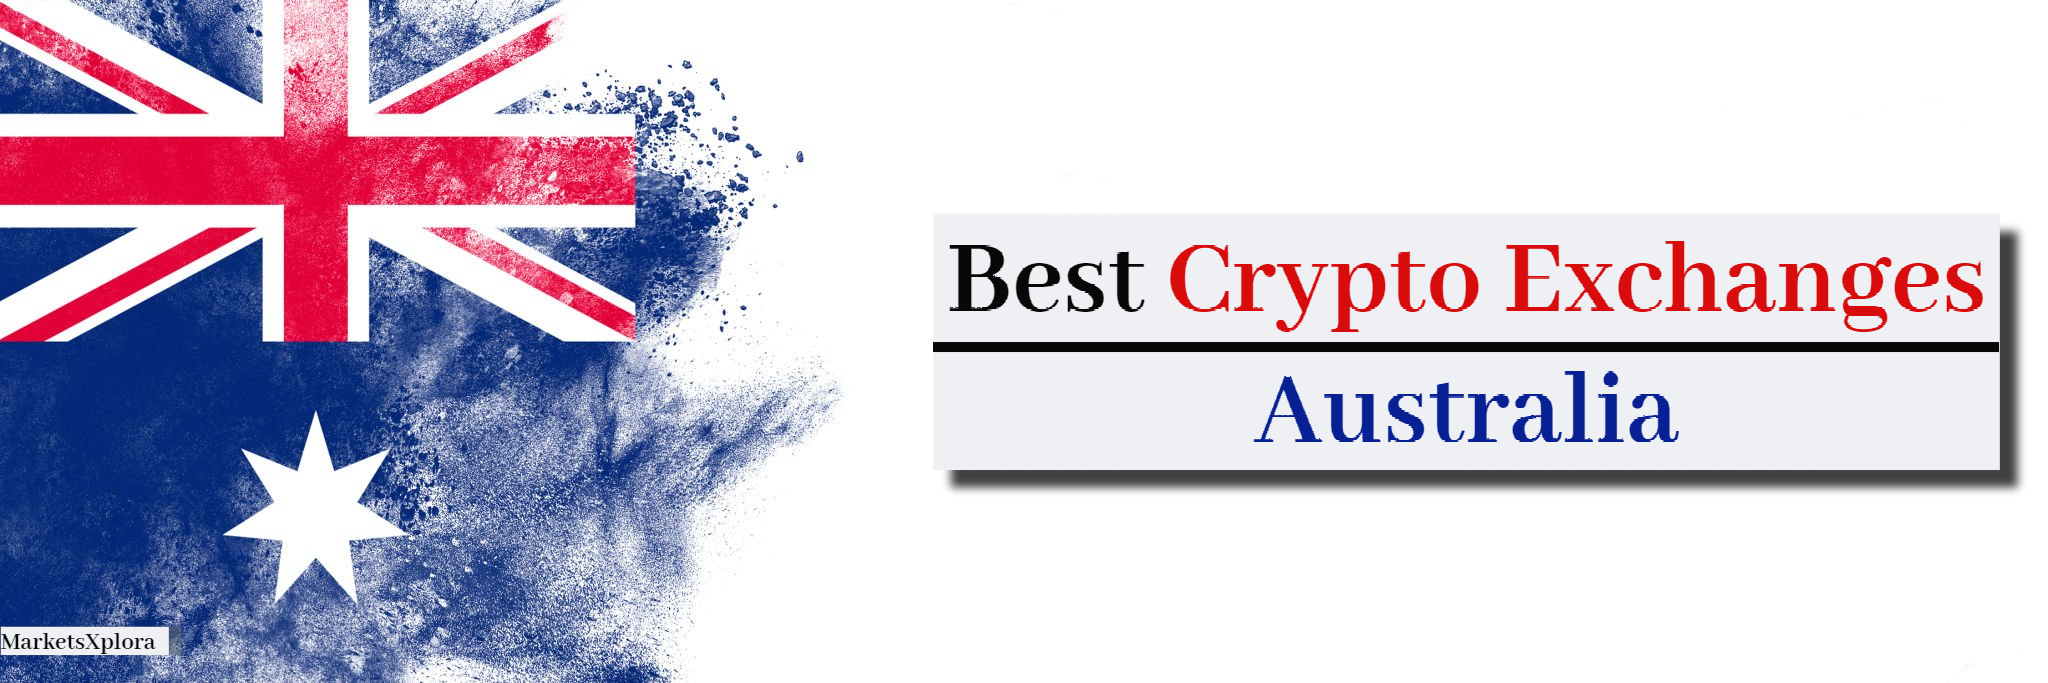 Find the best crypto exchanges in Australia for 2024. We compare fees, security, trading experience & other key factors to help you choose wisely.